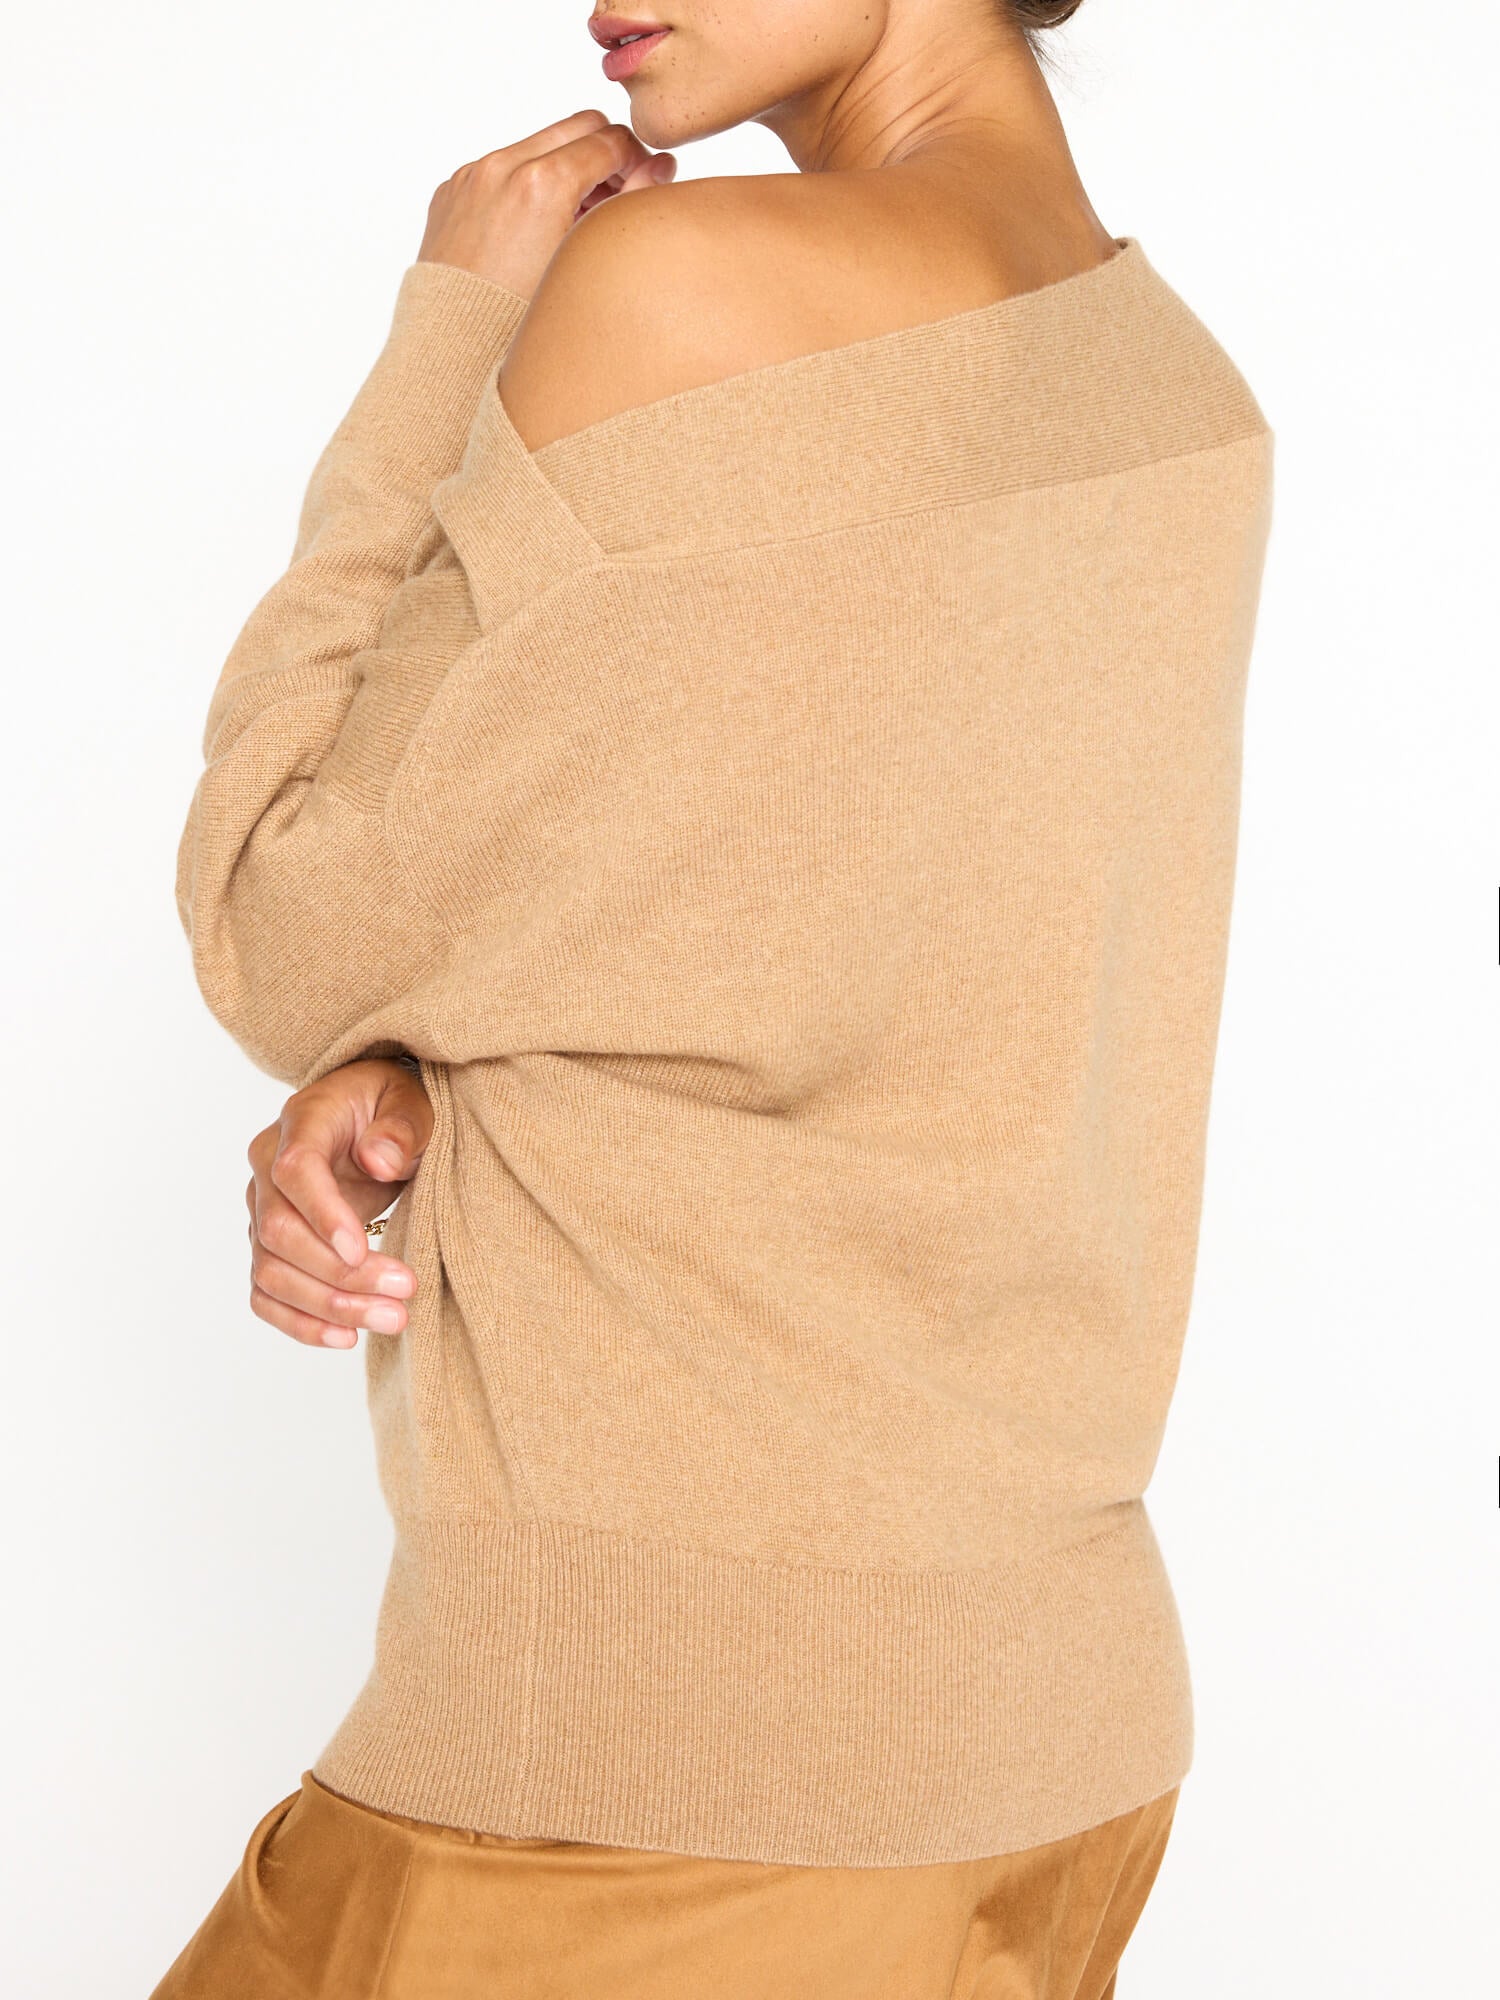 Dunne cashmere boatneck tan sweater back view